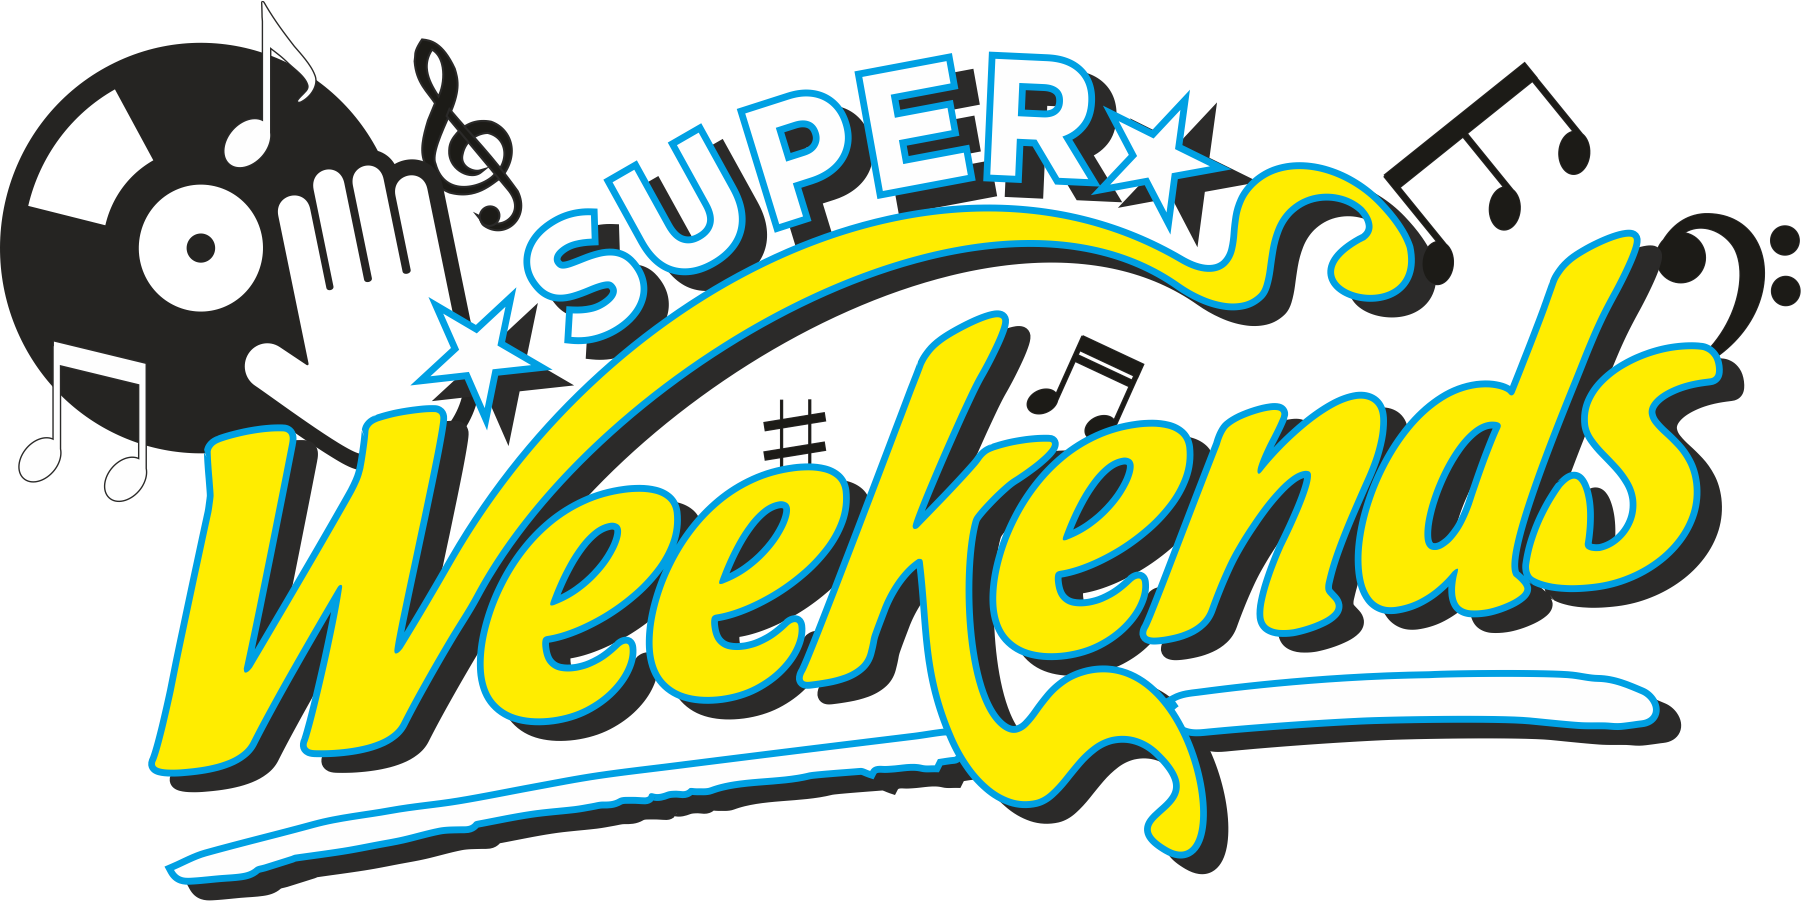 SUPER WEEKENDS LOGO For Wave Pool.png